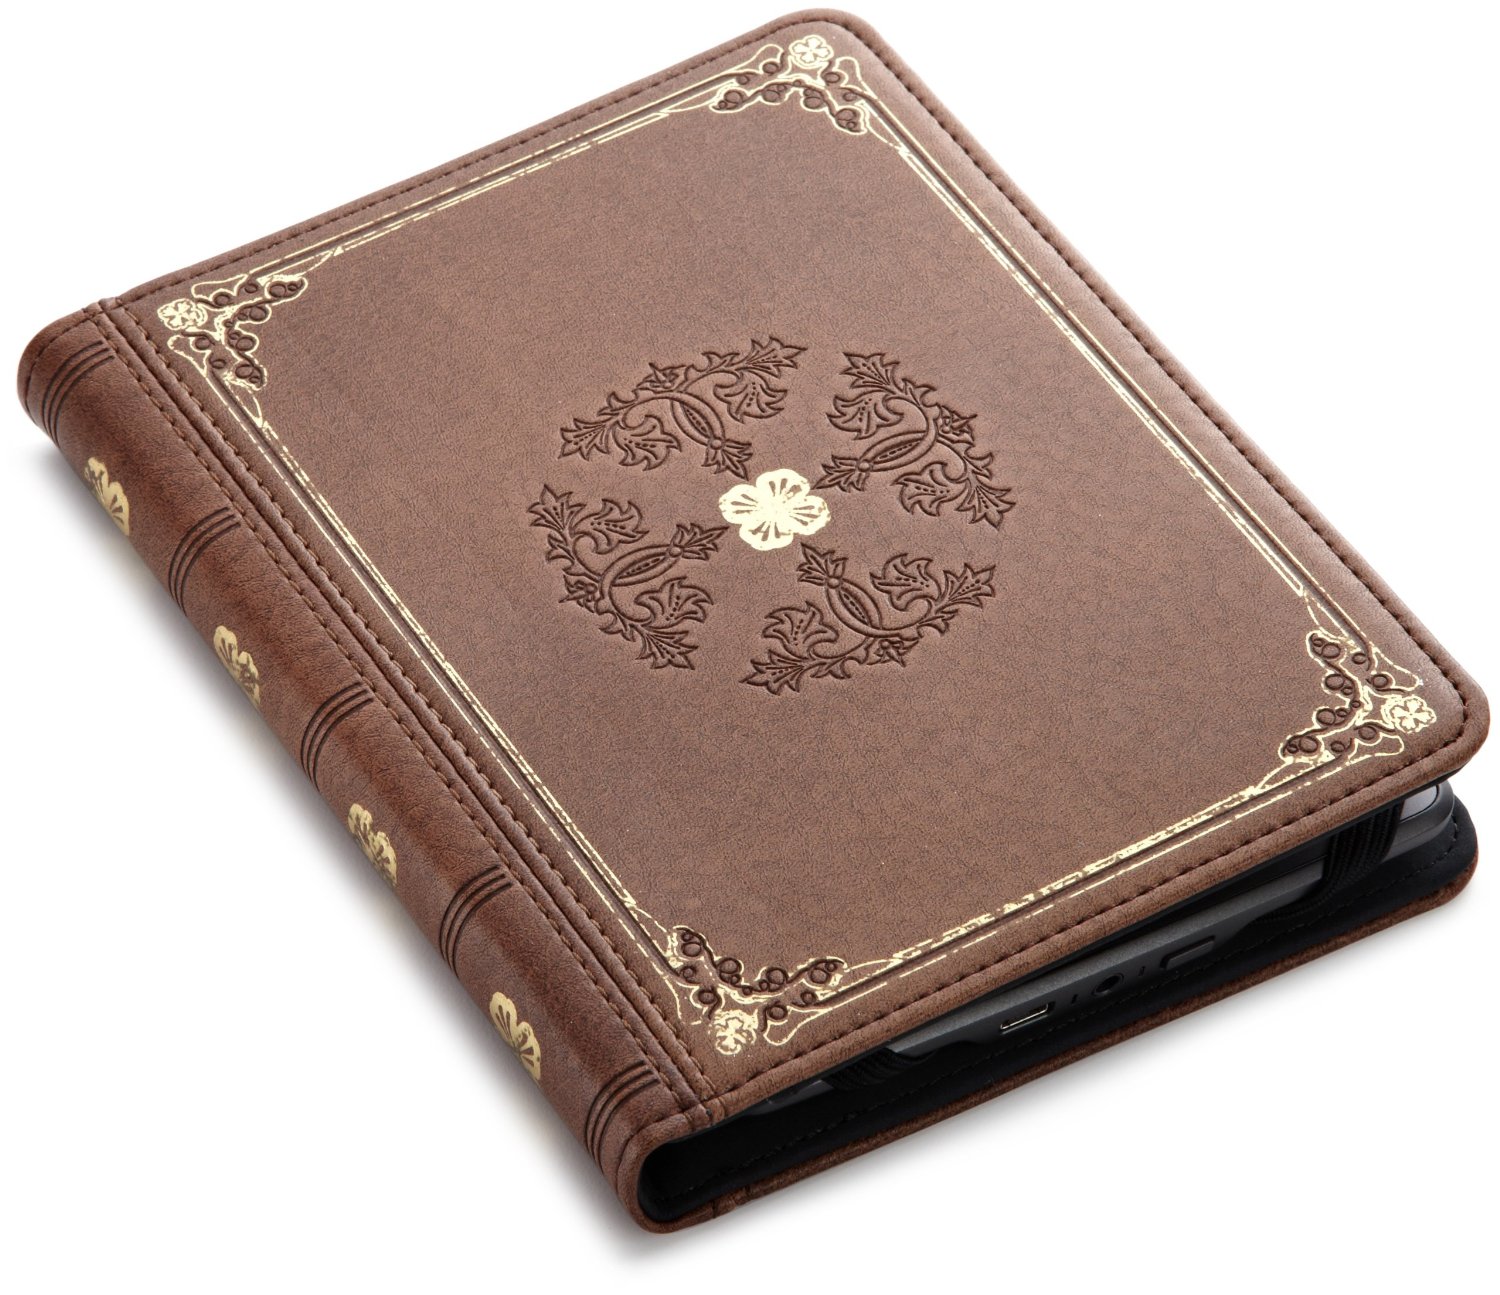 Antique Book Kindle Cover